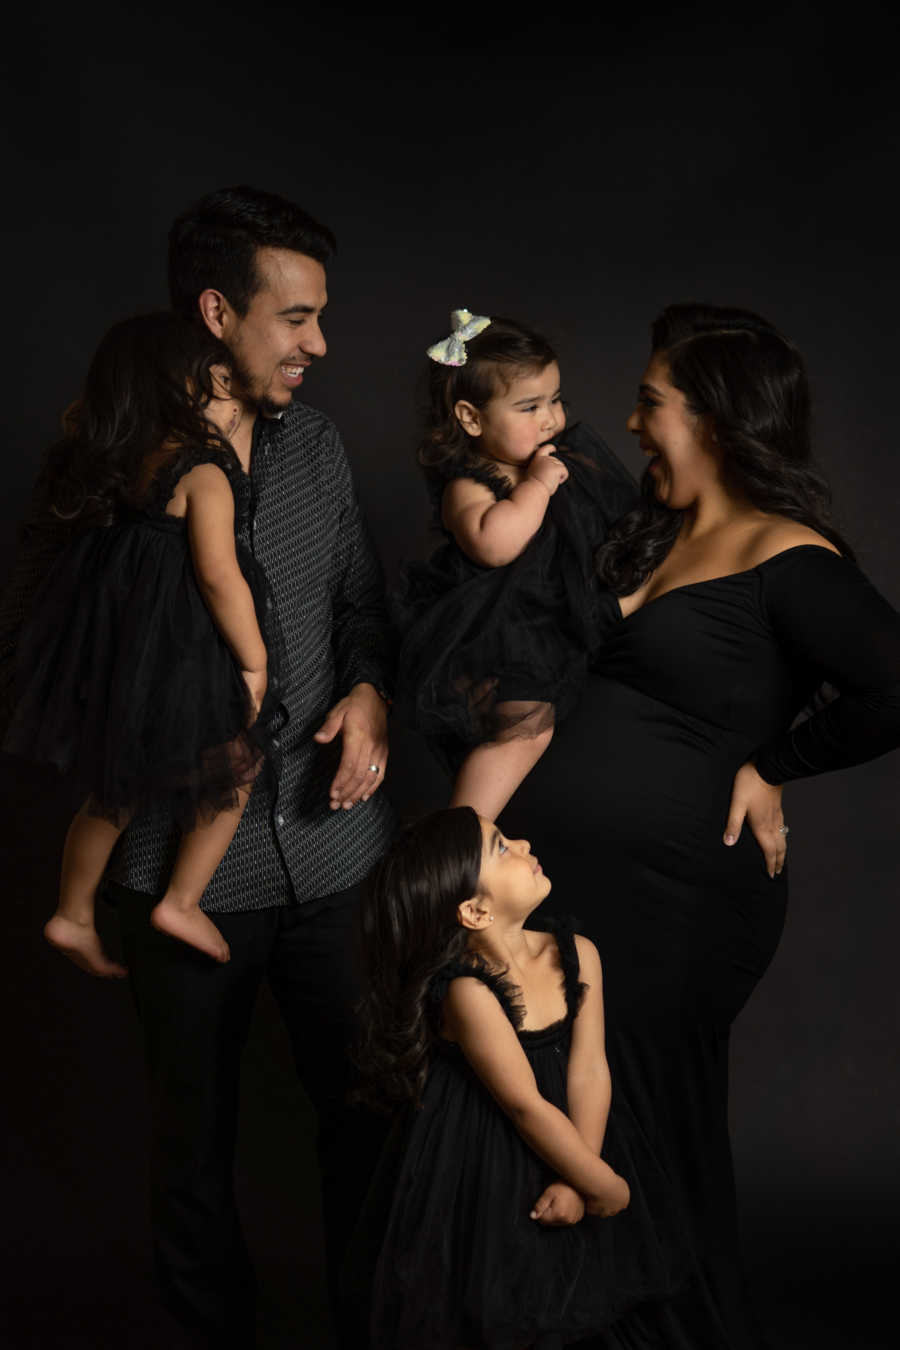 Family of 5 with pregnant mother wearing black and laughing